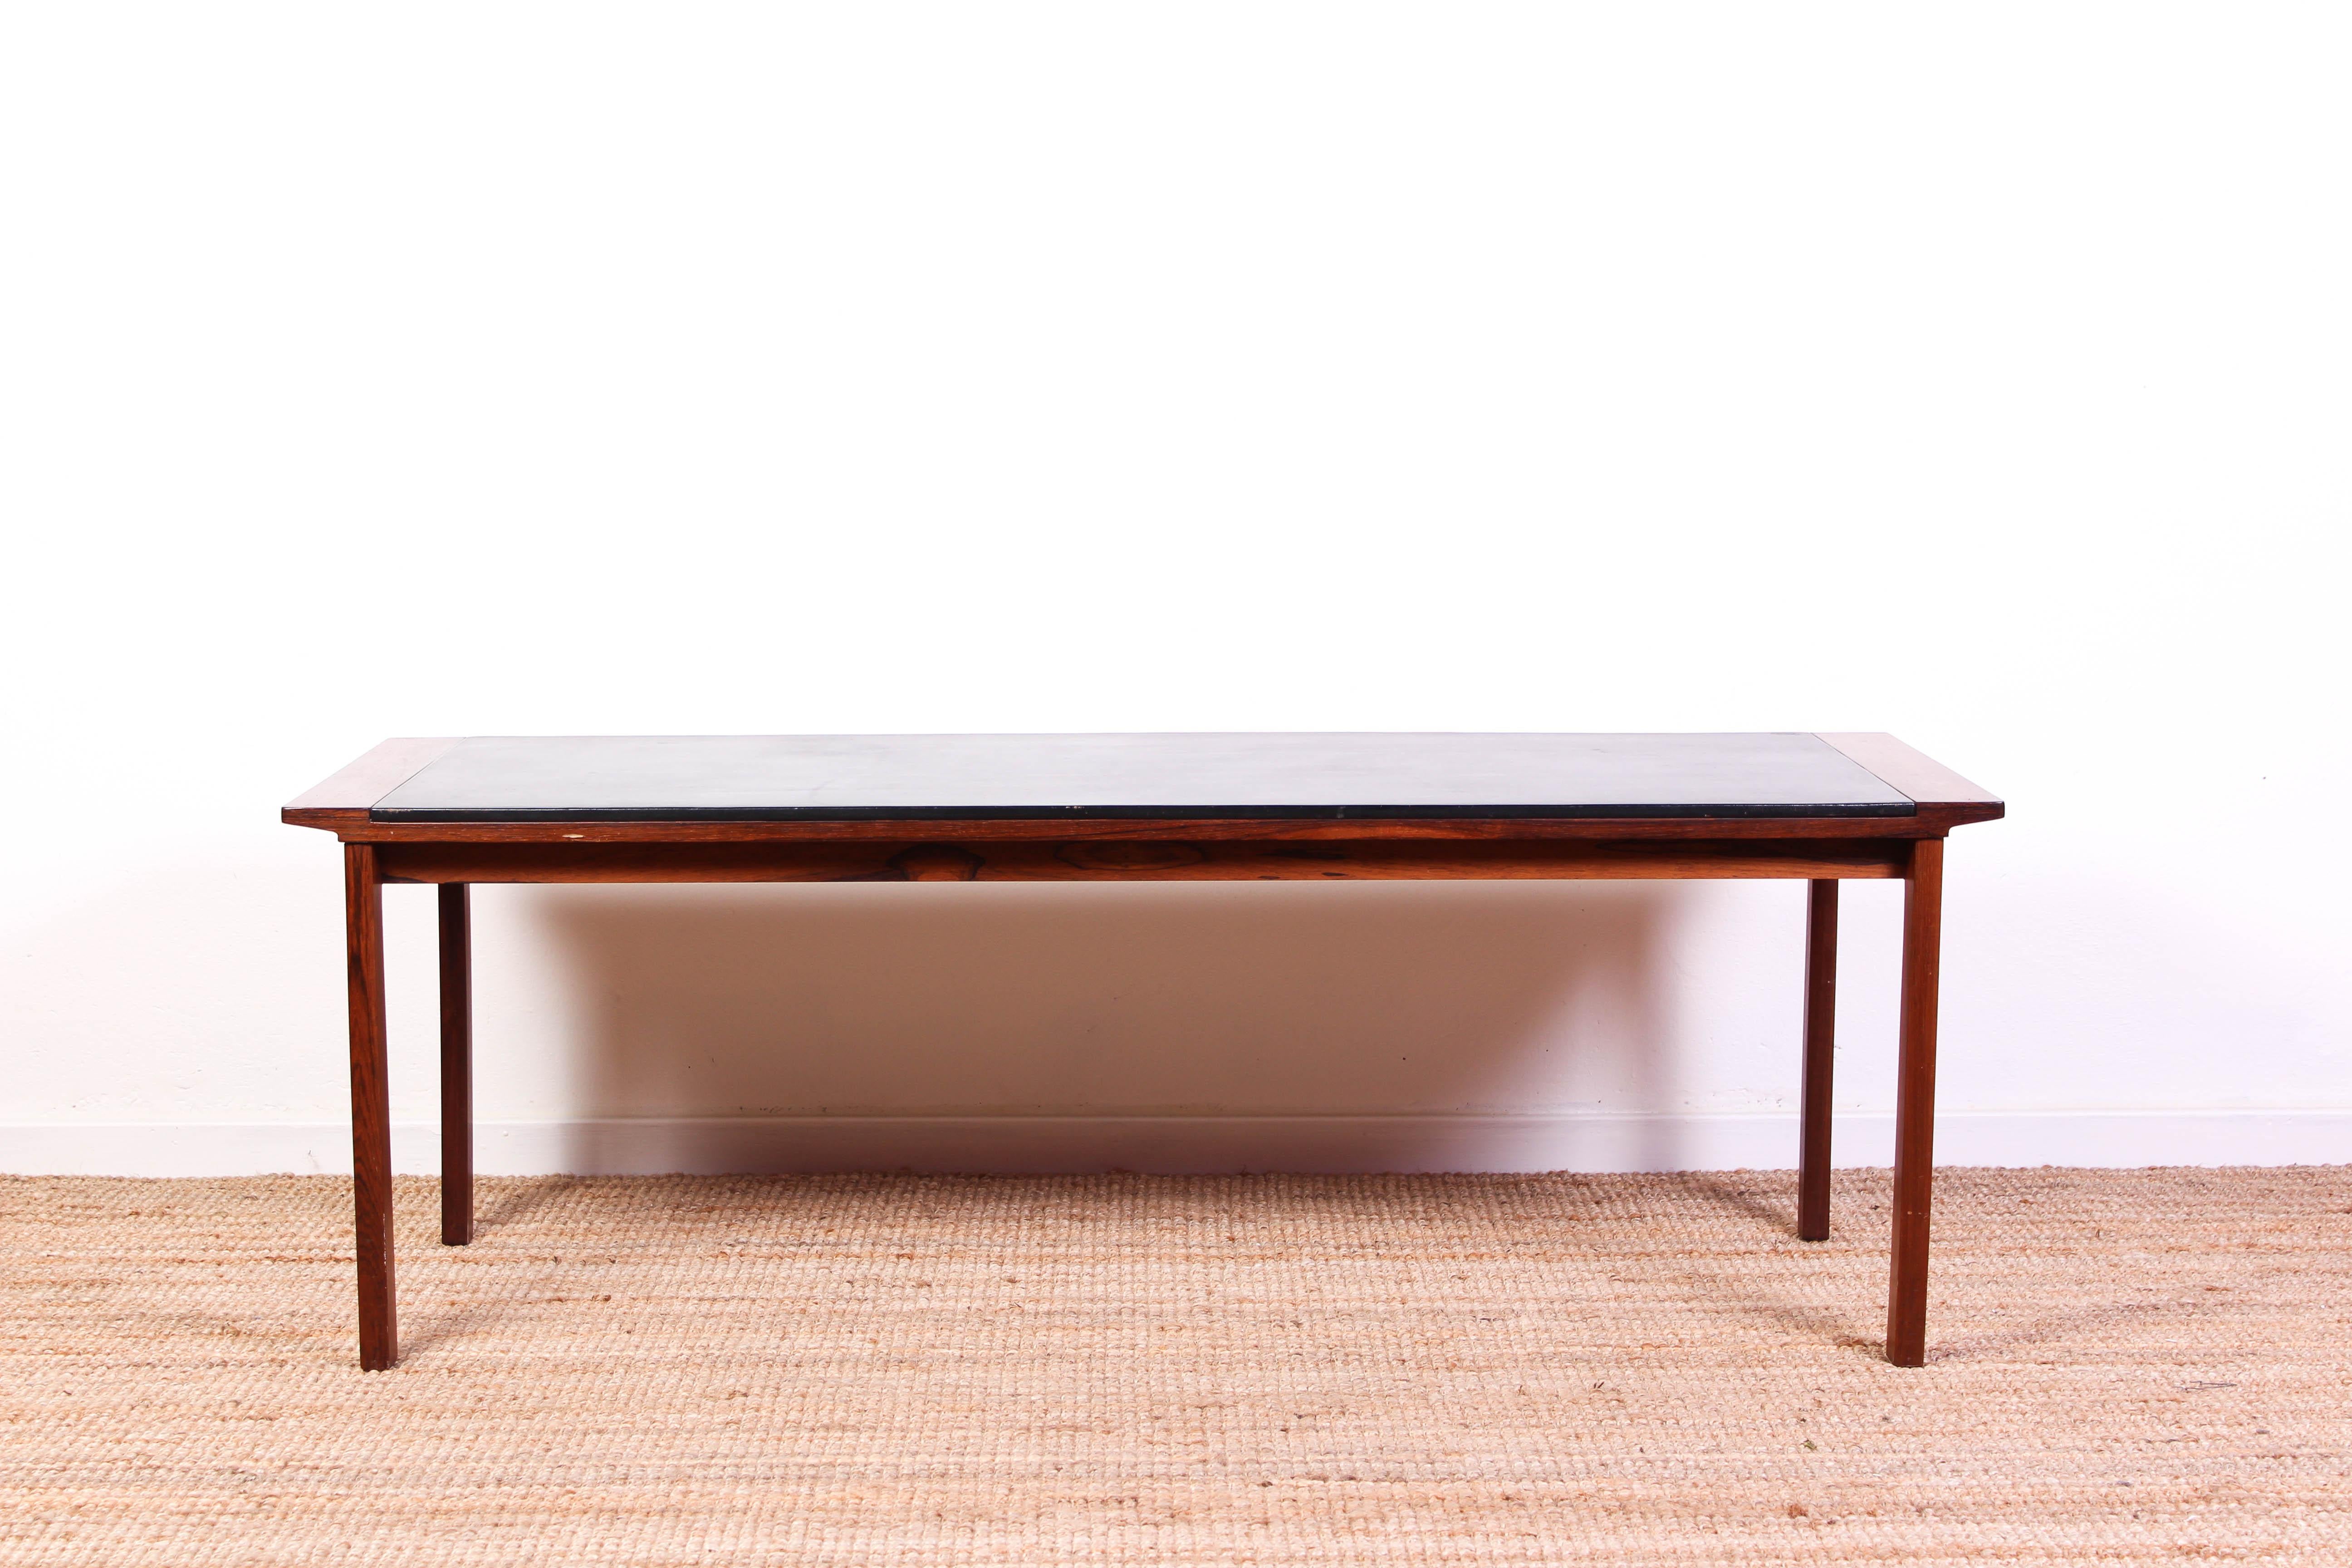 A midcentury Danish coffee table attributed to Ejvind A Johansson. The coffee table is made out of at rosewood frame and a black leather tabletop. It is in very good vintage condition with some signs of usage on the tabletop consistent with age and